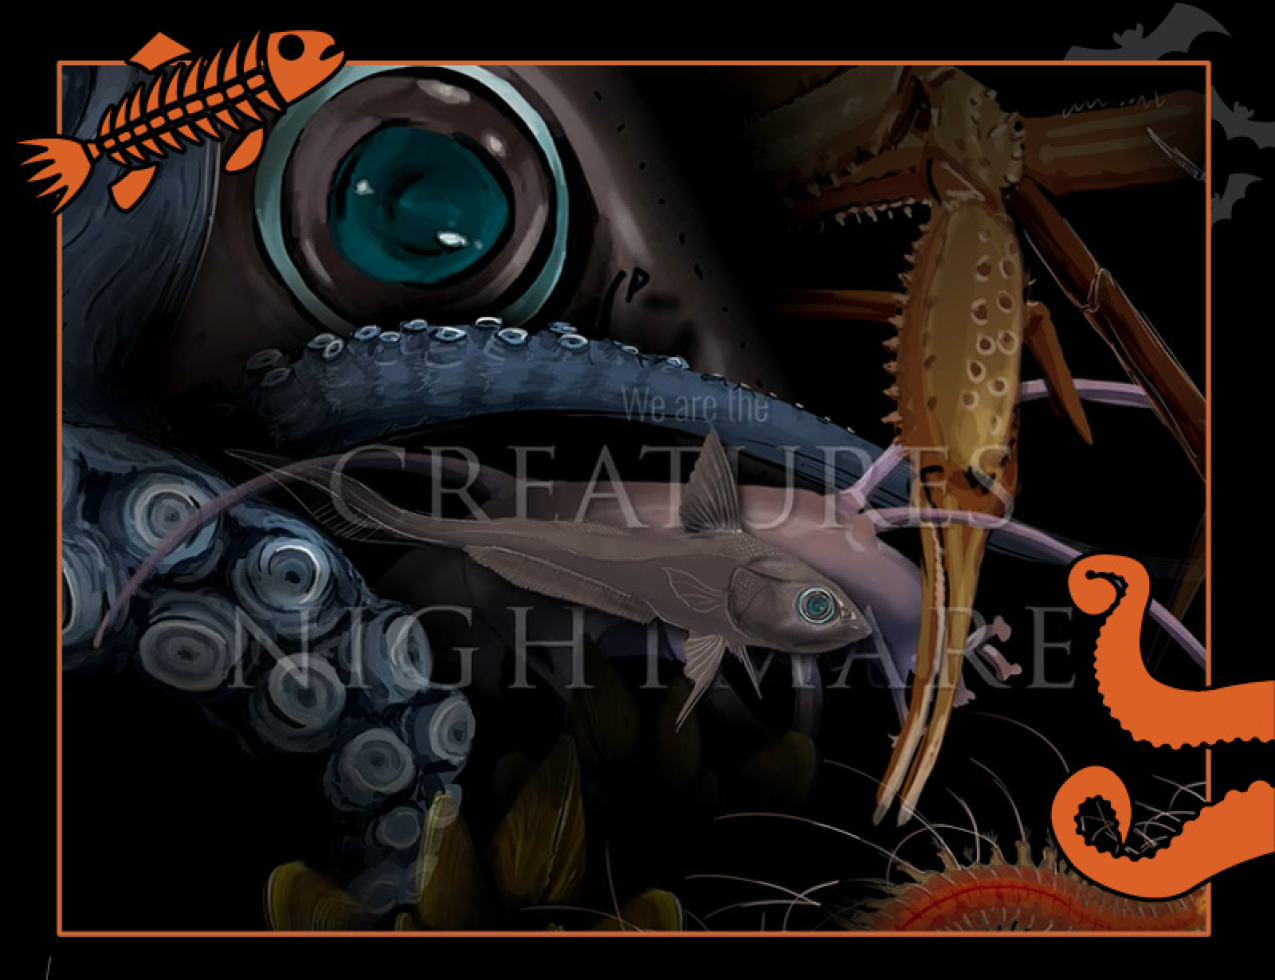 Illustration of deep marine sea creatures. Text: We are the creatures of nightmares. Border of the photo is black with orange sea creature graphics of octopus tentacles and a fish skeleton. Text: Creatures of a whale fall, #NOAASpookyScience with NOAA logo.